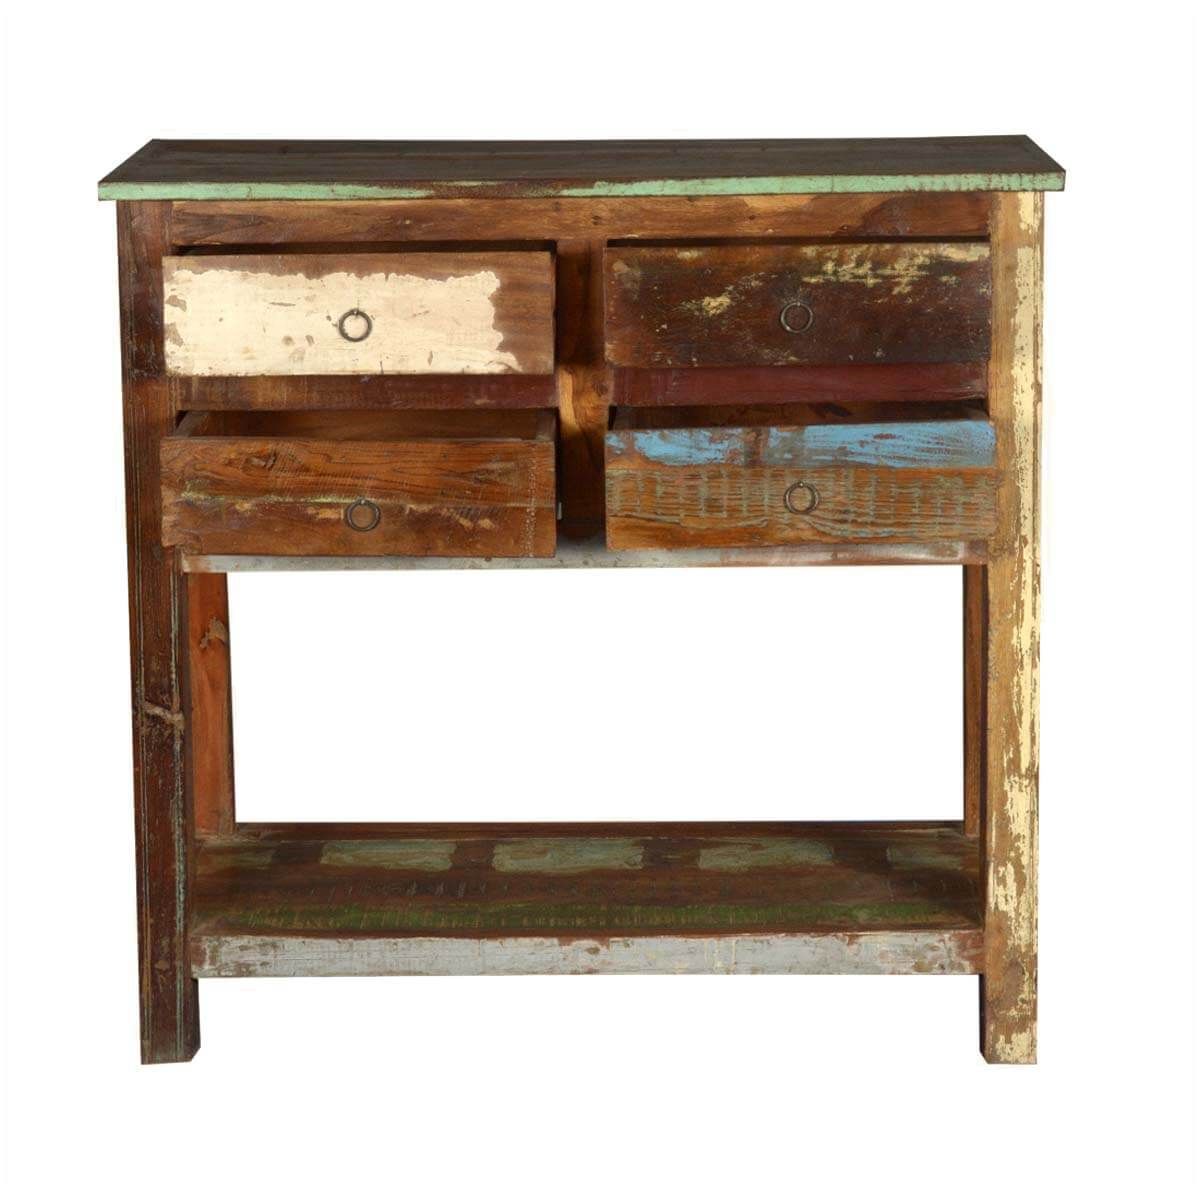 2 Tier Reclaimed Wood Console Table With 4 Drawers In Barnwood Console Tables (View 12 of 20)